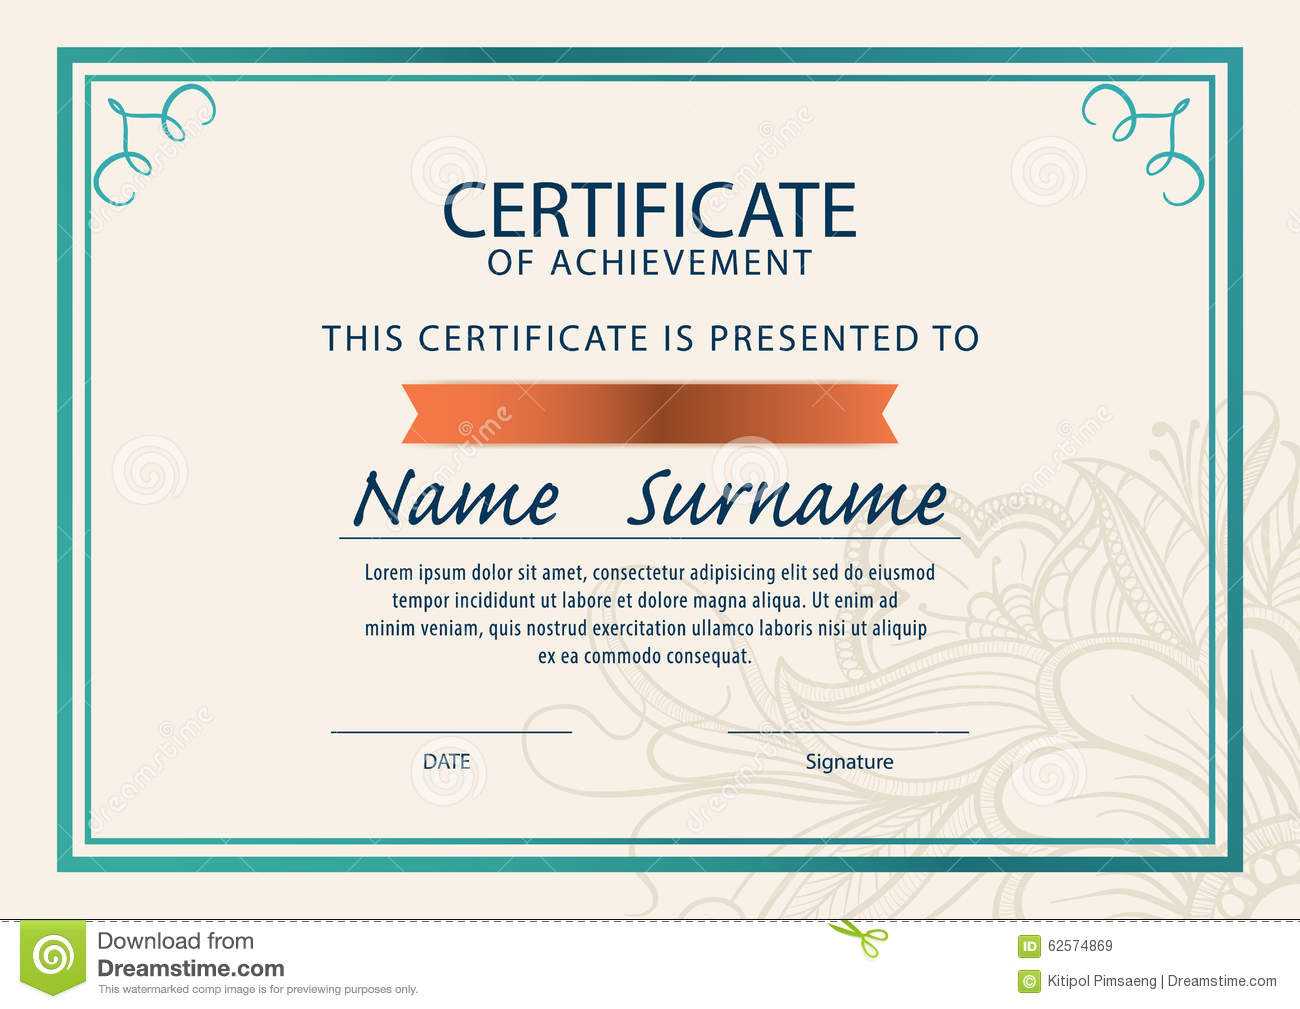 Certificate Template,diploma,a4 Size , Illustration 62574869 Intended For Certificate Template Size